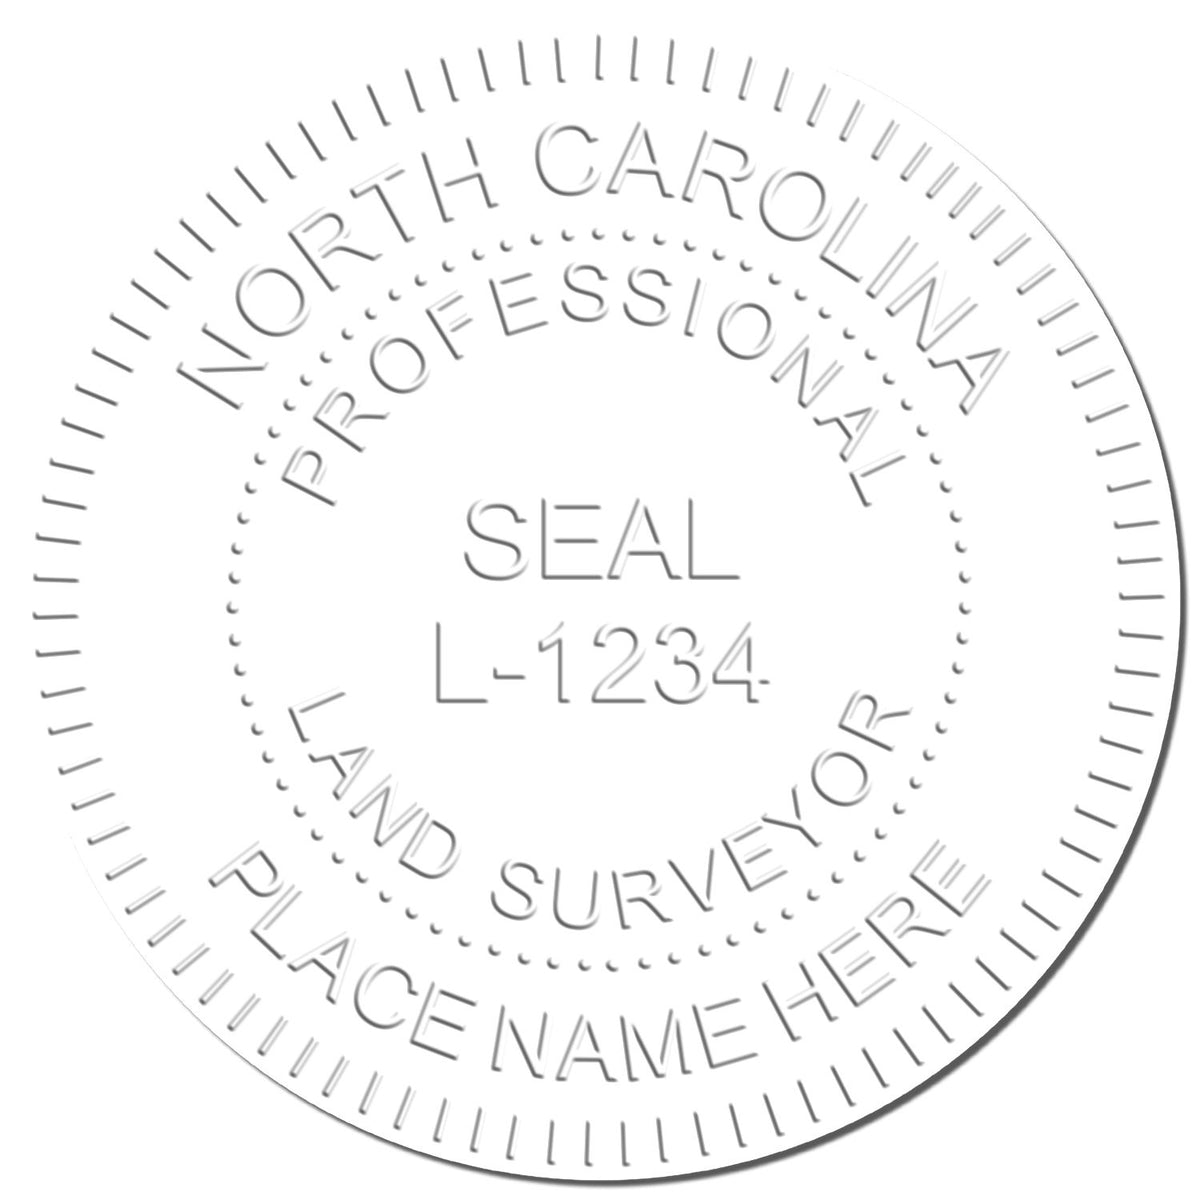 This paper is stamped with a sample imprint of the State of North Carolina Soft Land Surveyor Embossing Seal, signifying its quality and reliability.